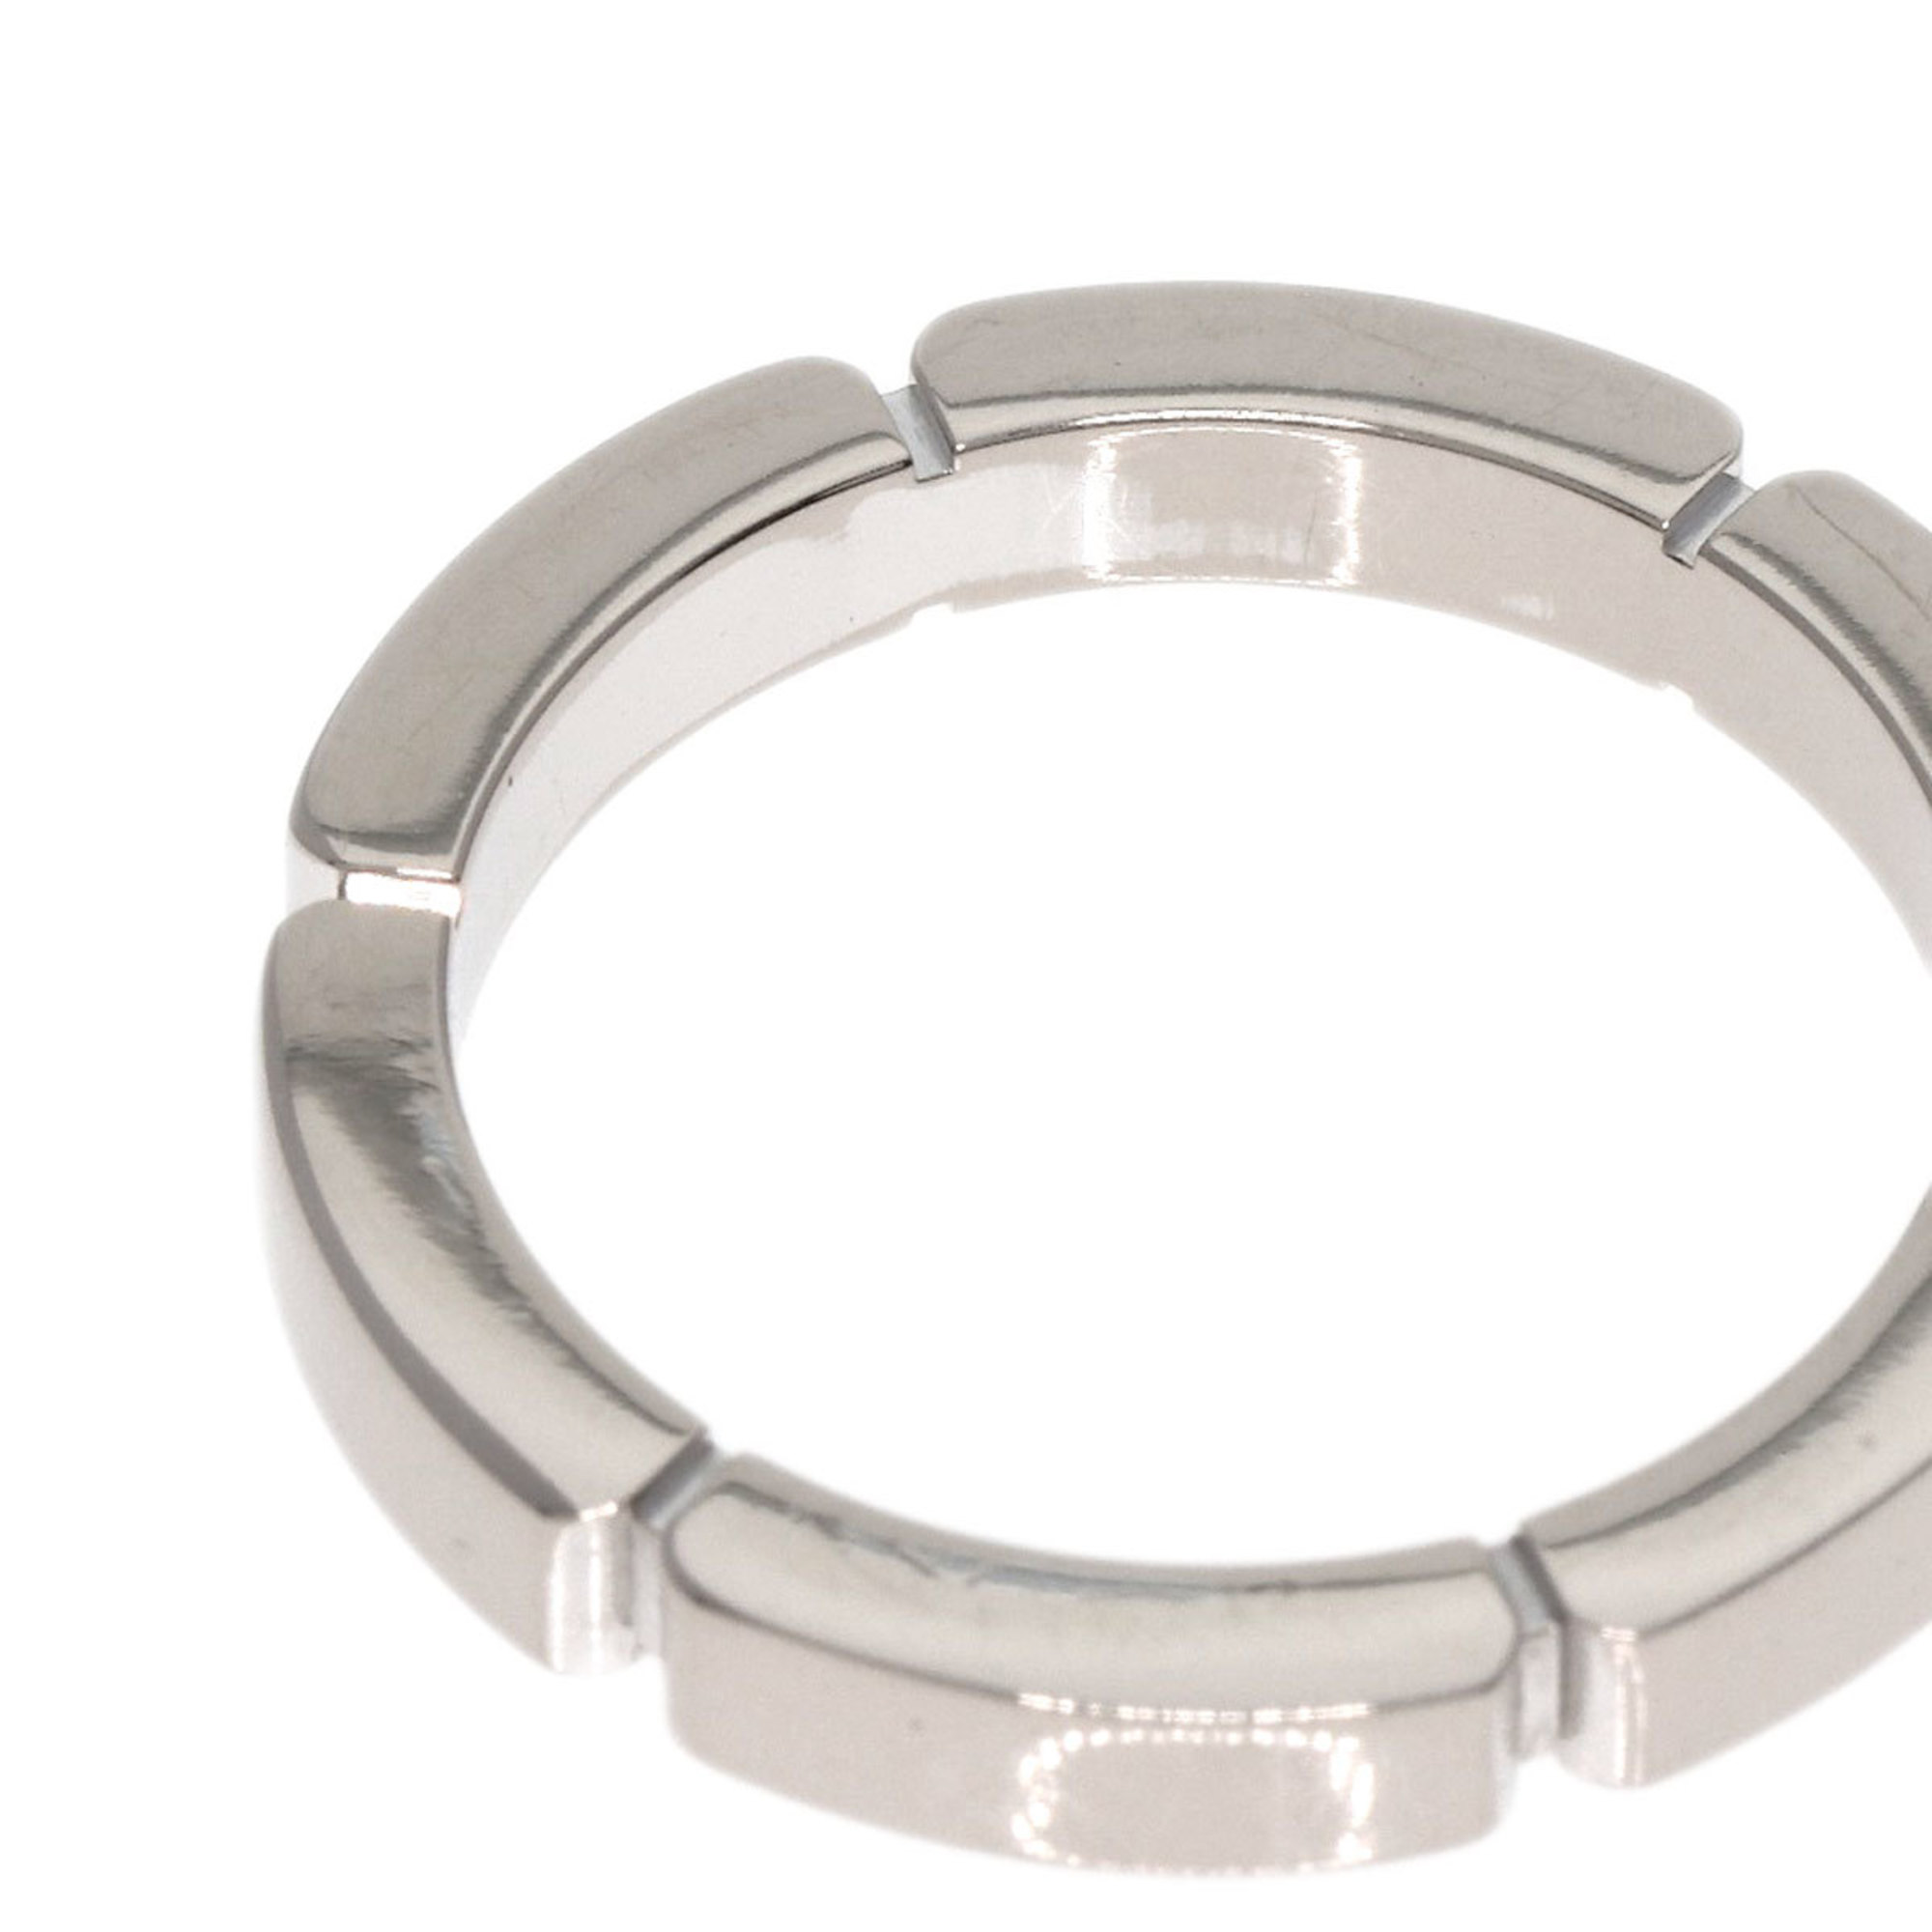 Cartier Maillon Panthere #46 Ring, 18K White Gold, Women's, CARTIER